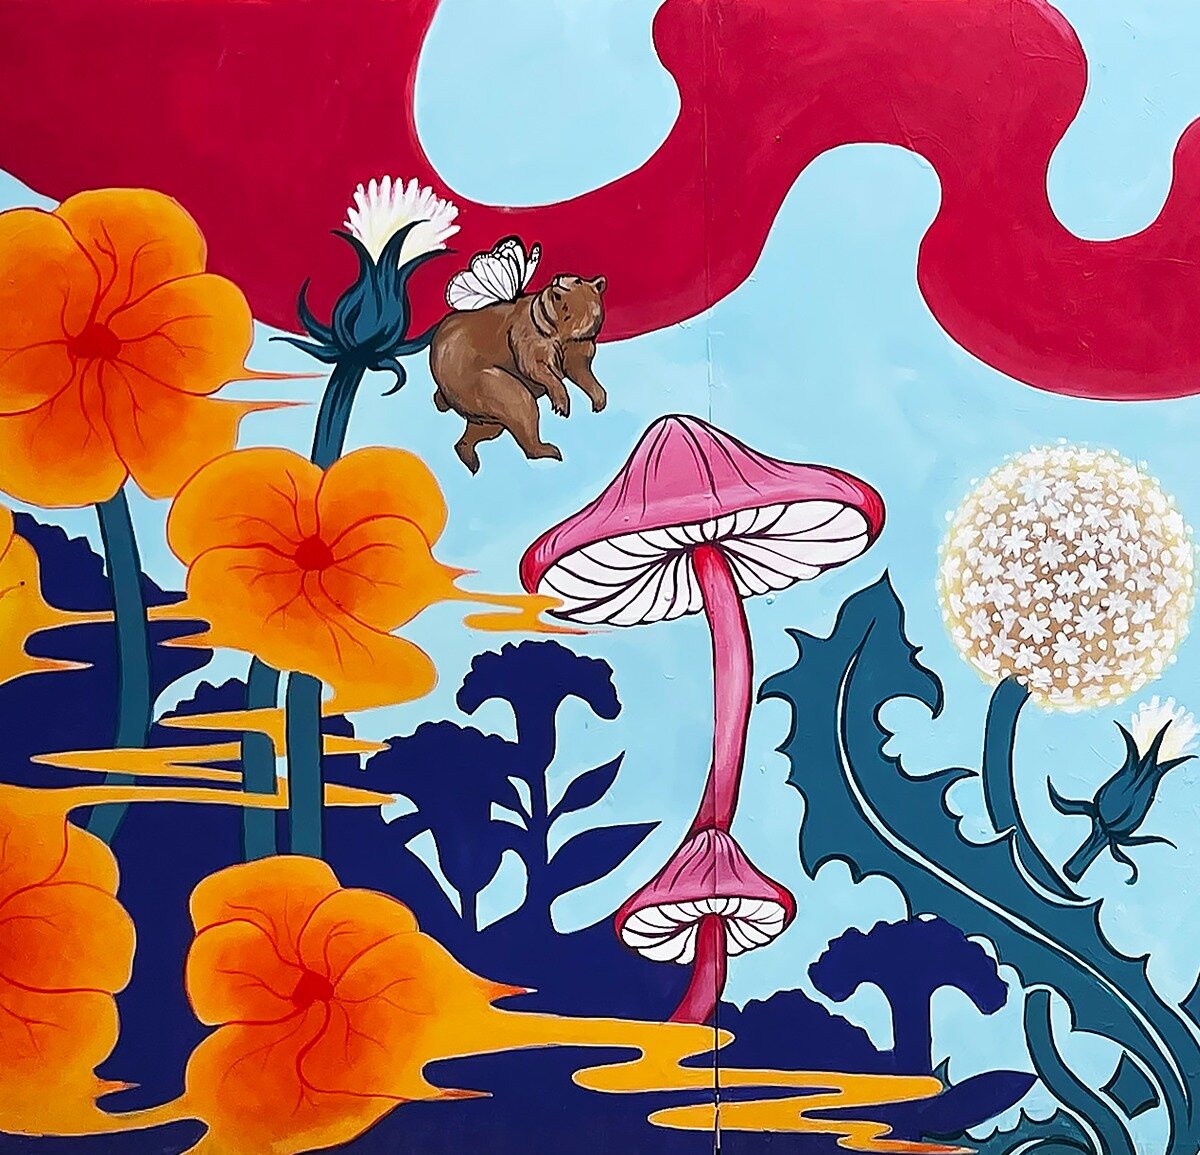 🍄 HAPPY MURAL MONDAY 🍄
👉SWIPE THRU👈 to see a seamless experience of this COLORFULLY DREAMLIKE mural created by @jamie_gerhold for the 2023 Plaza Walls Mural Expo! This WONDERFUL artist from Maryland brought this WHIMSICAL SCENE to life in the Pla